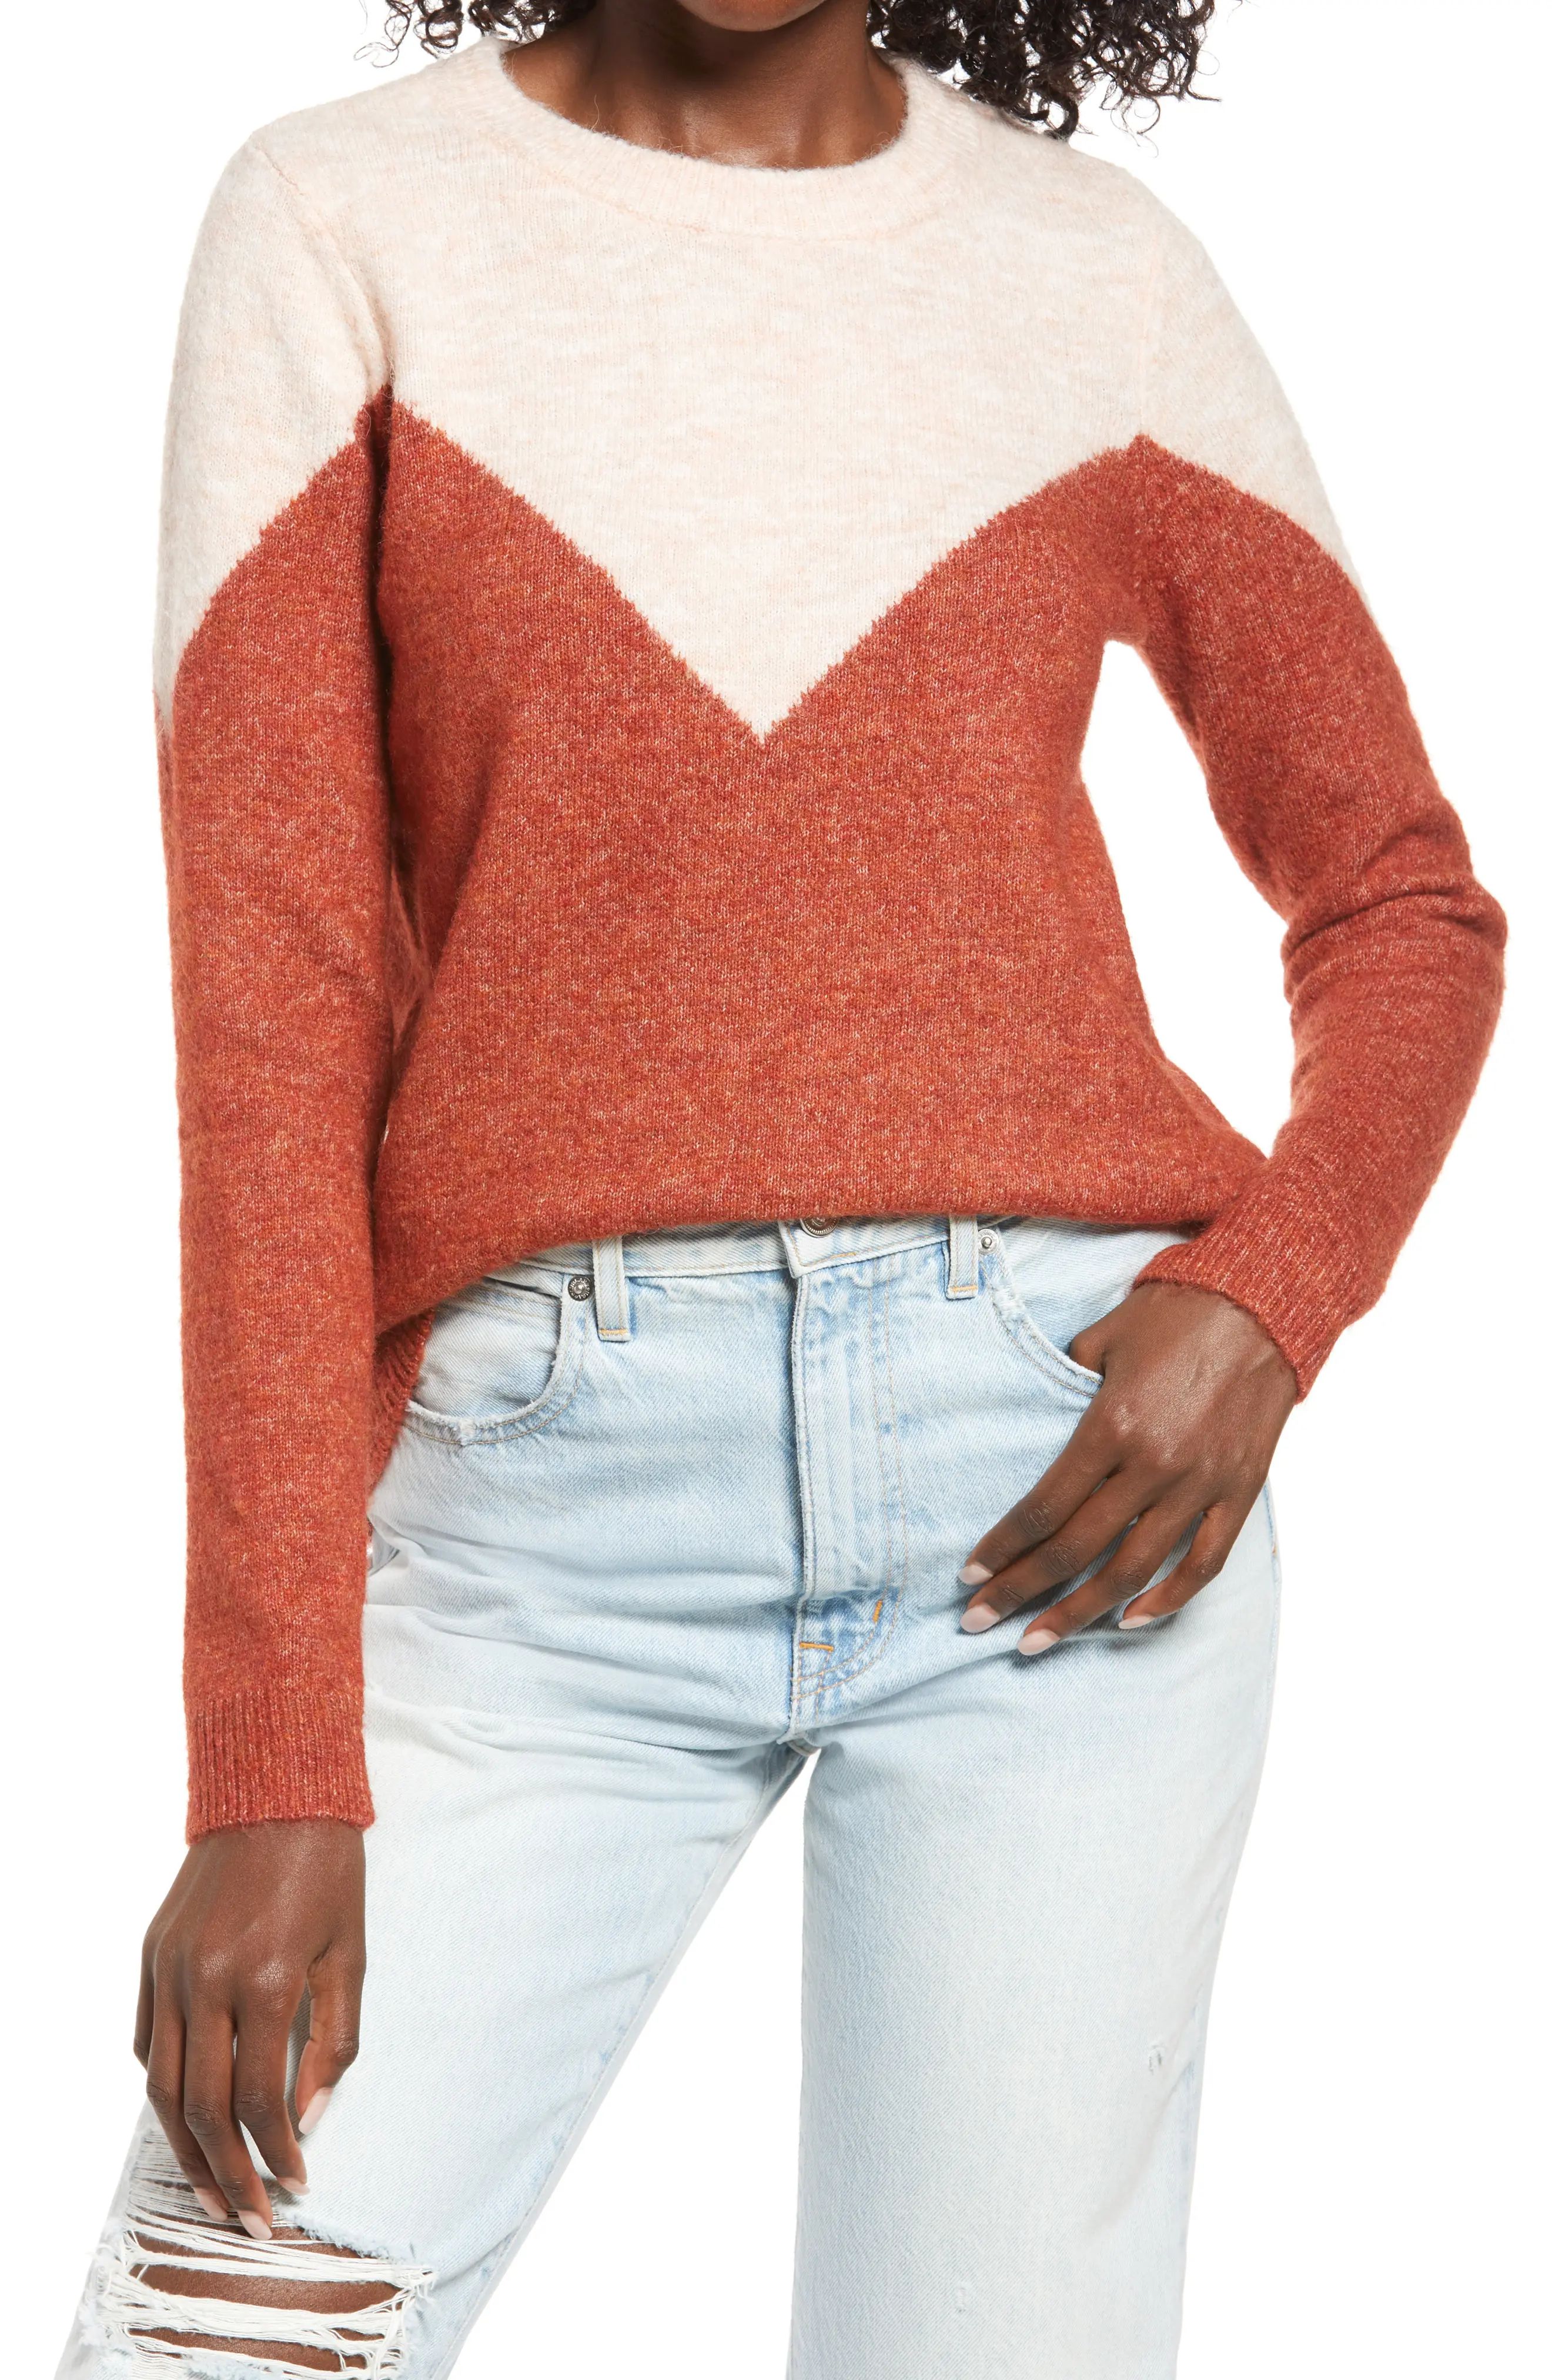 VERO MODA Plaza Colorblock Sweater, Size Small in Misty Rose Detail at Nordstrom | Nordstrom